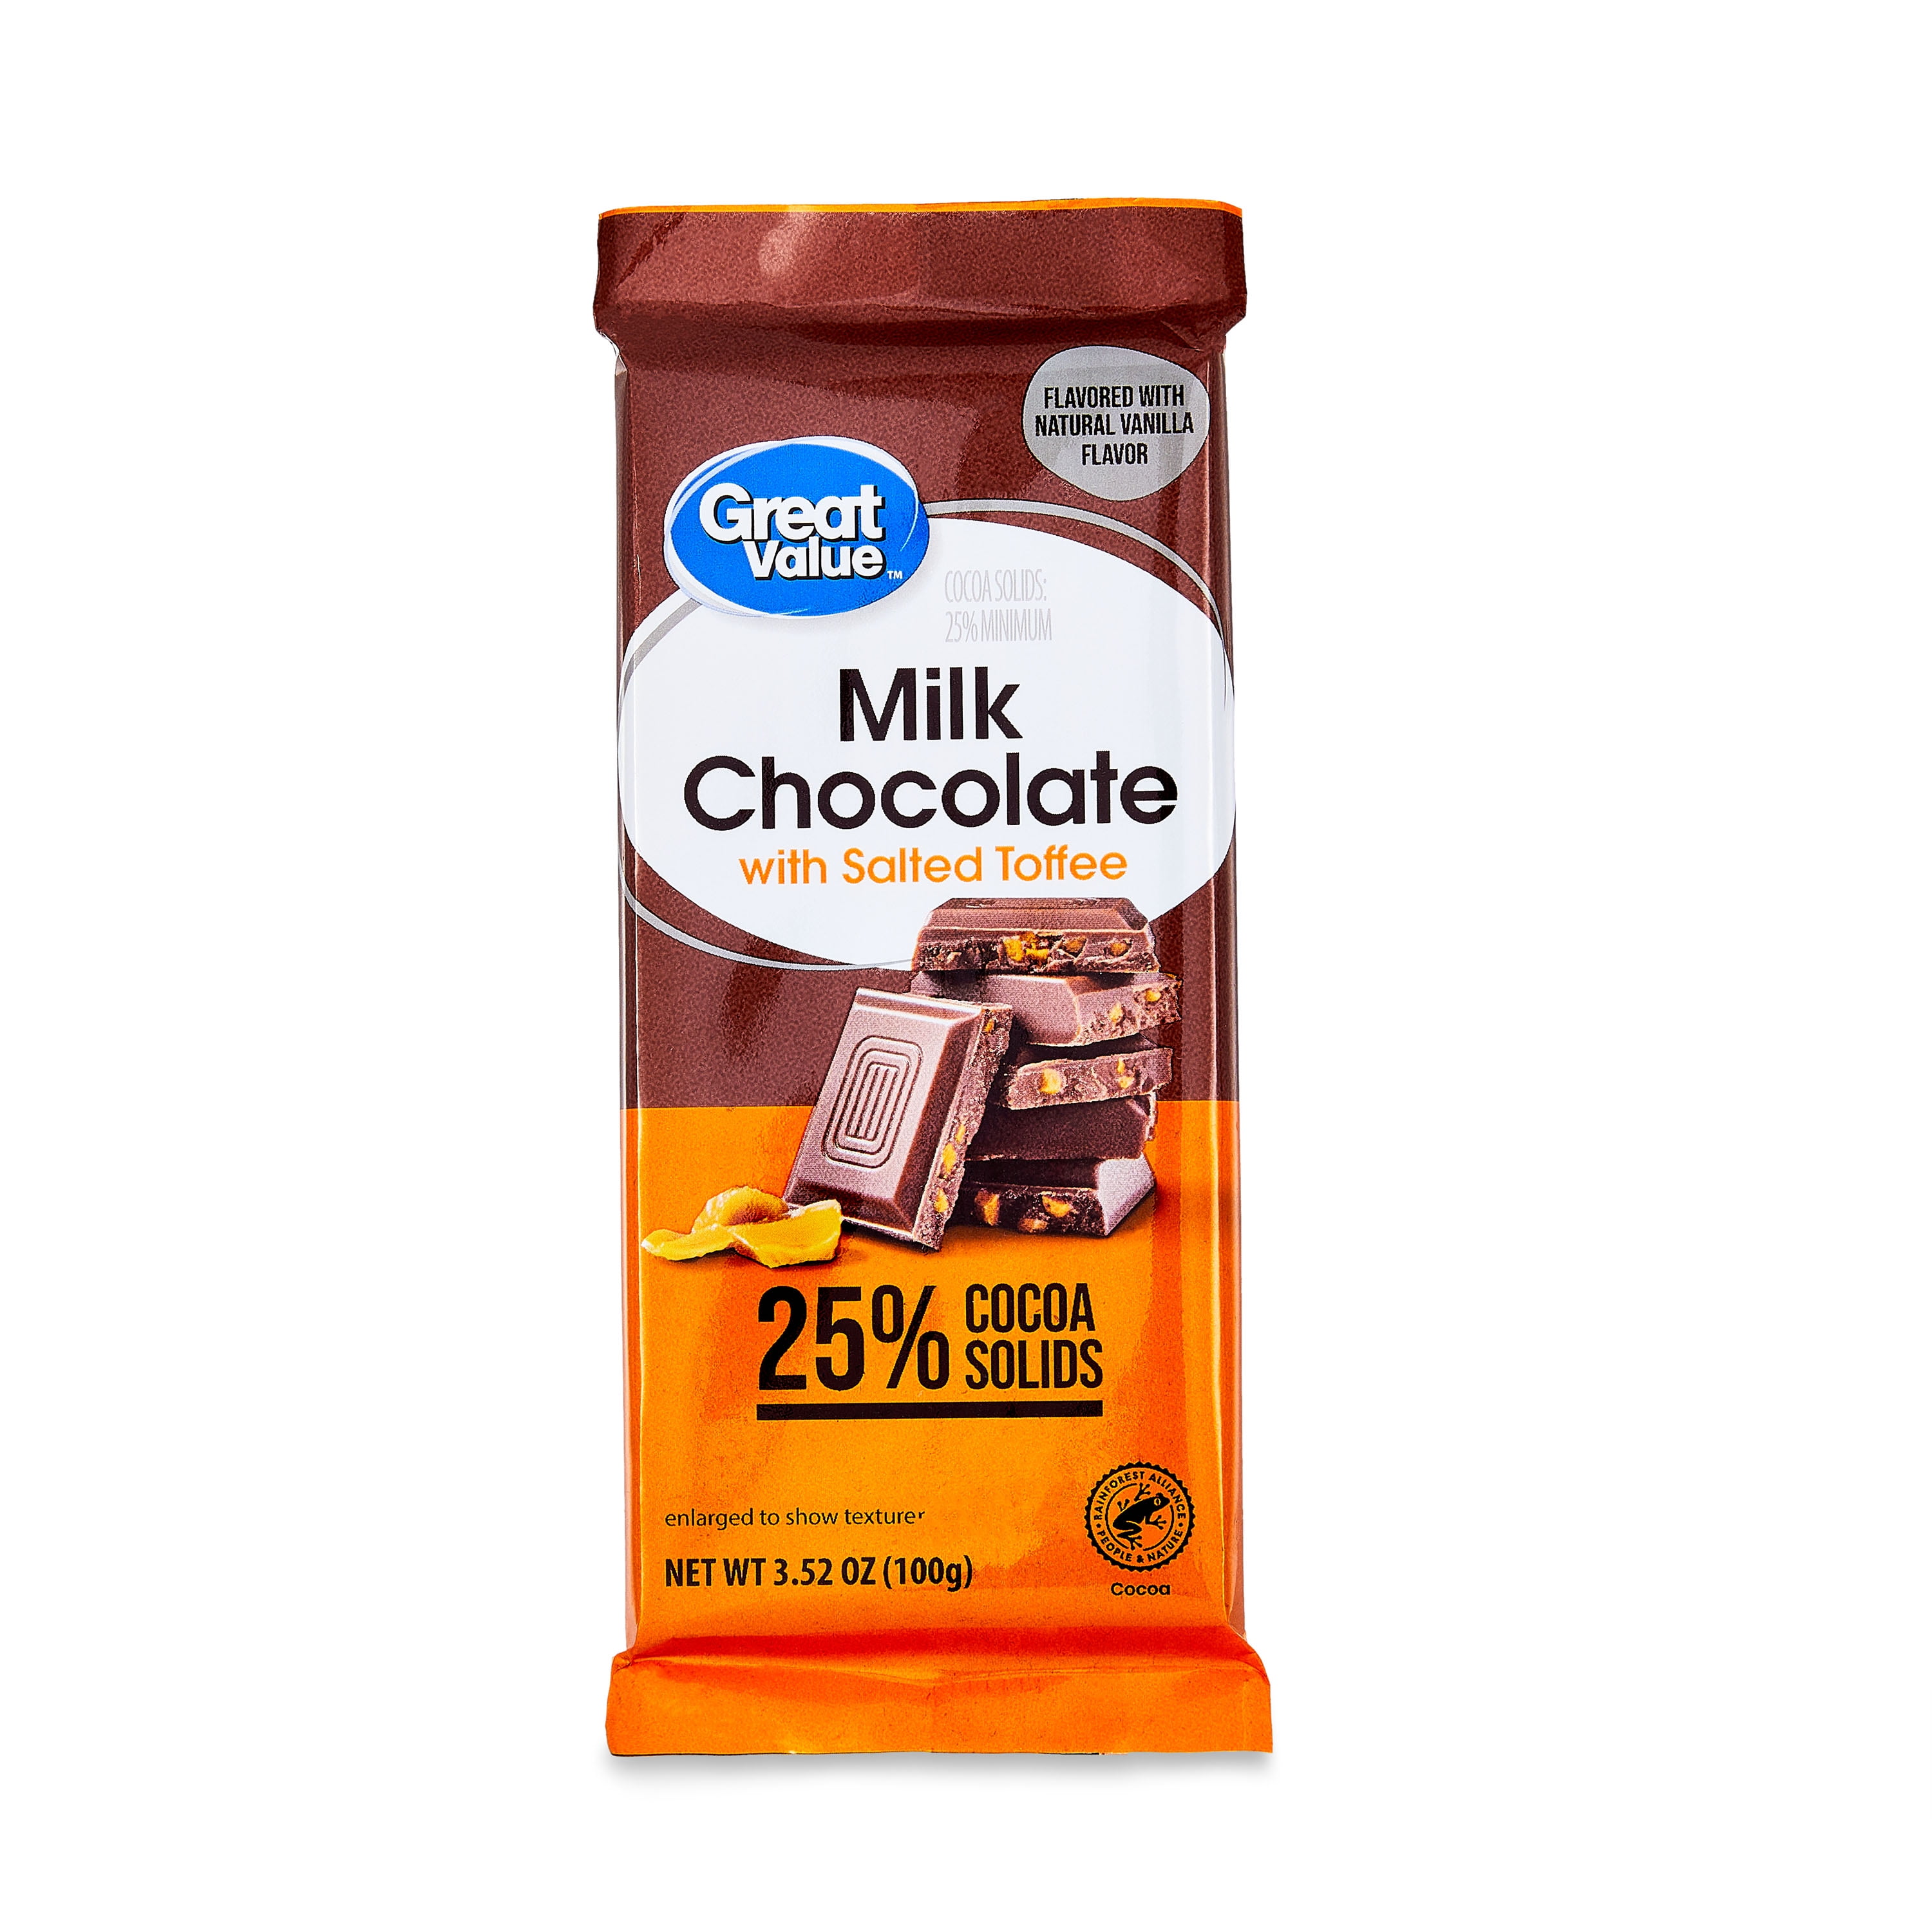 Great Value Milk Chocolate with Salted Toffee Bar, 3.52 oz